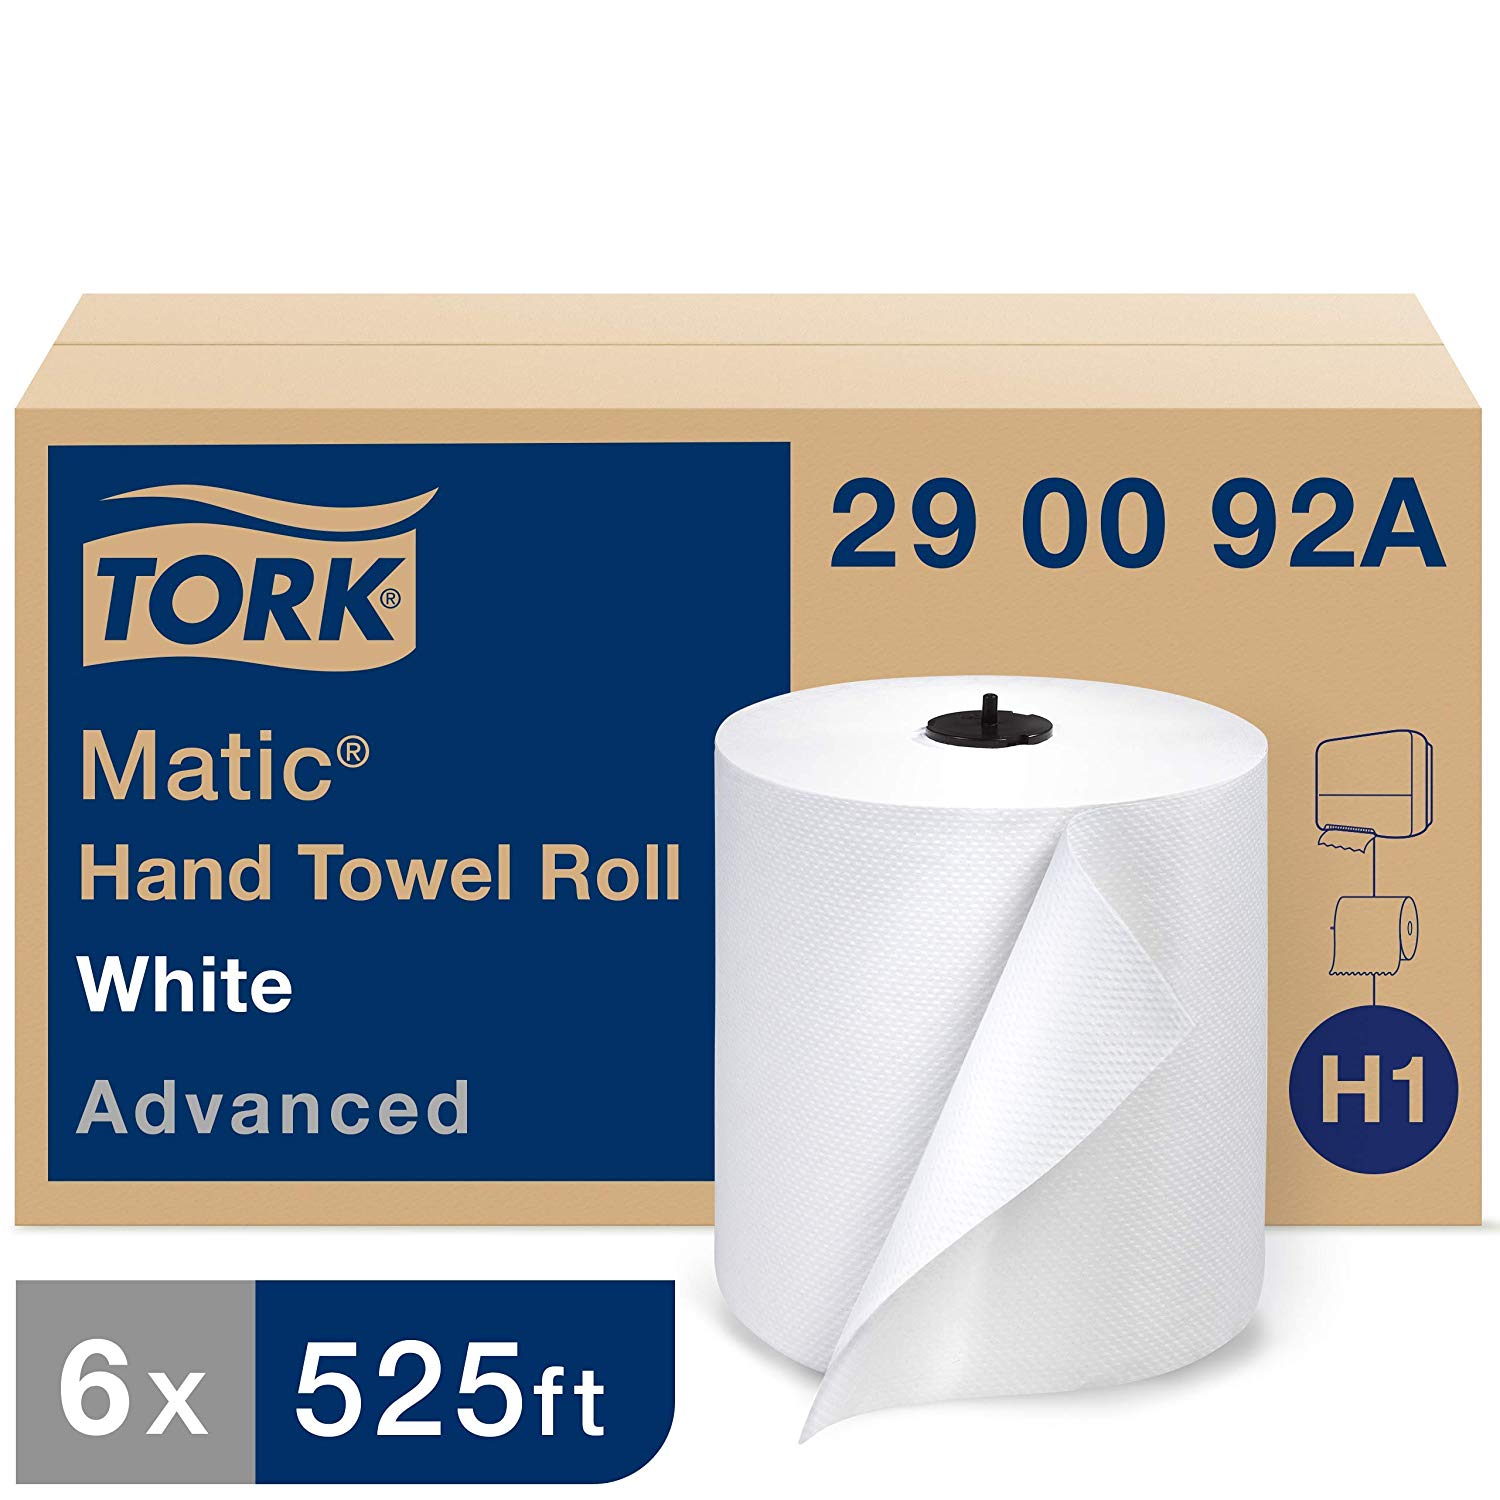 SCA AIRLAID TORK TOWEL
(290092) 6 ROLLS/CASE 525
FT./ROLL